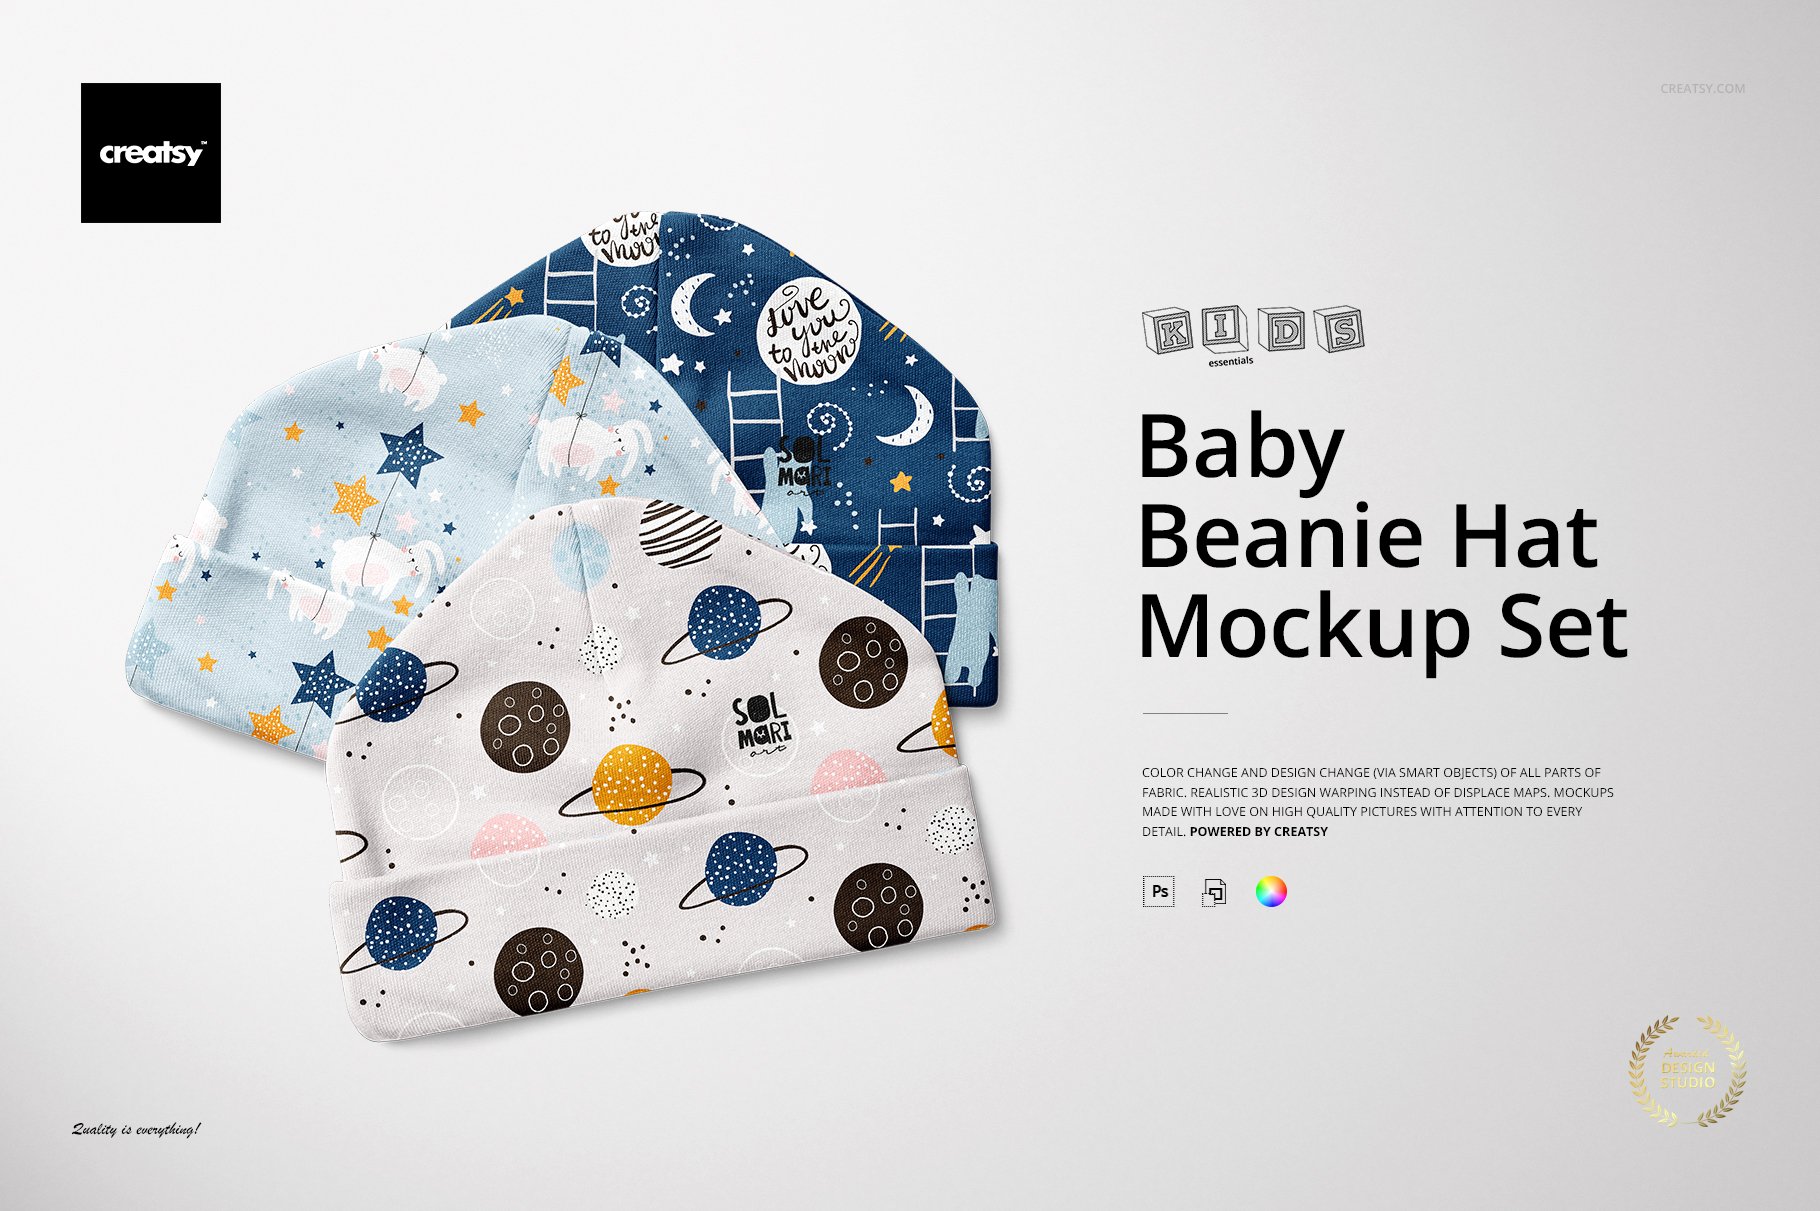 Baby Beanie Hat (0-3m) Mockup Set cover image.